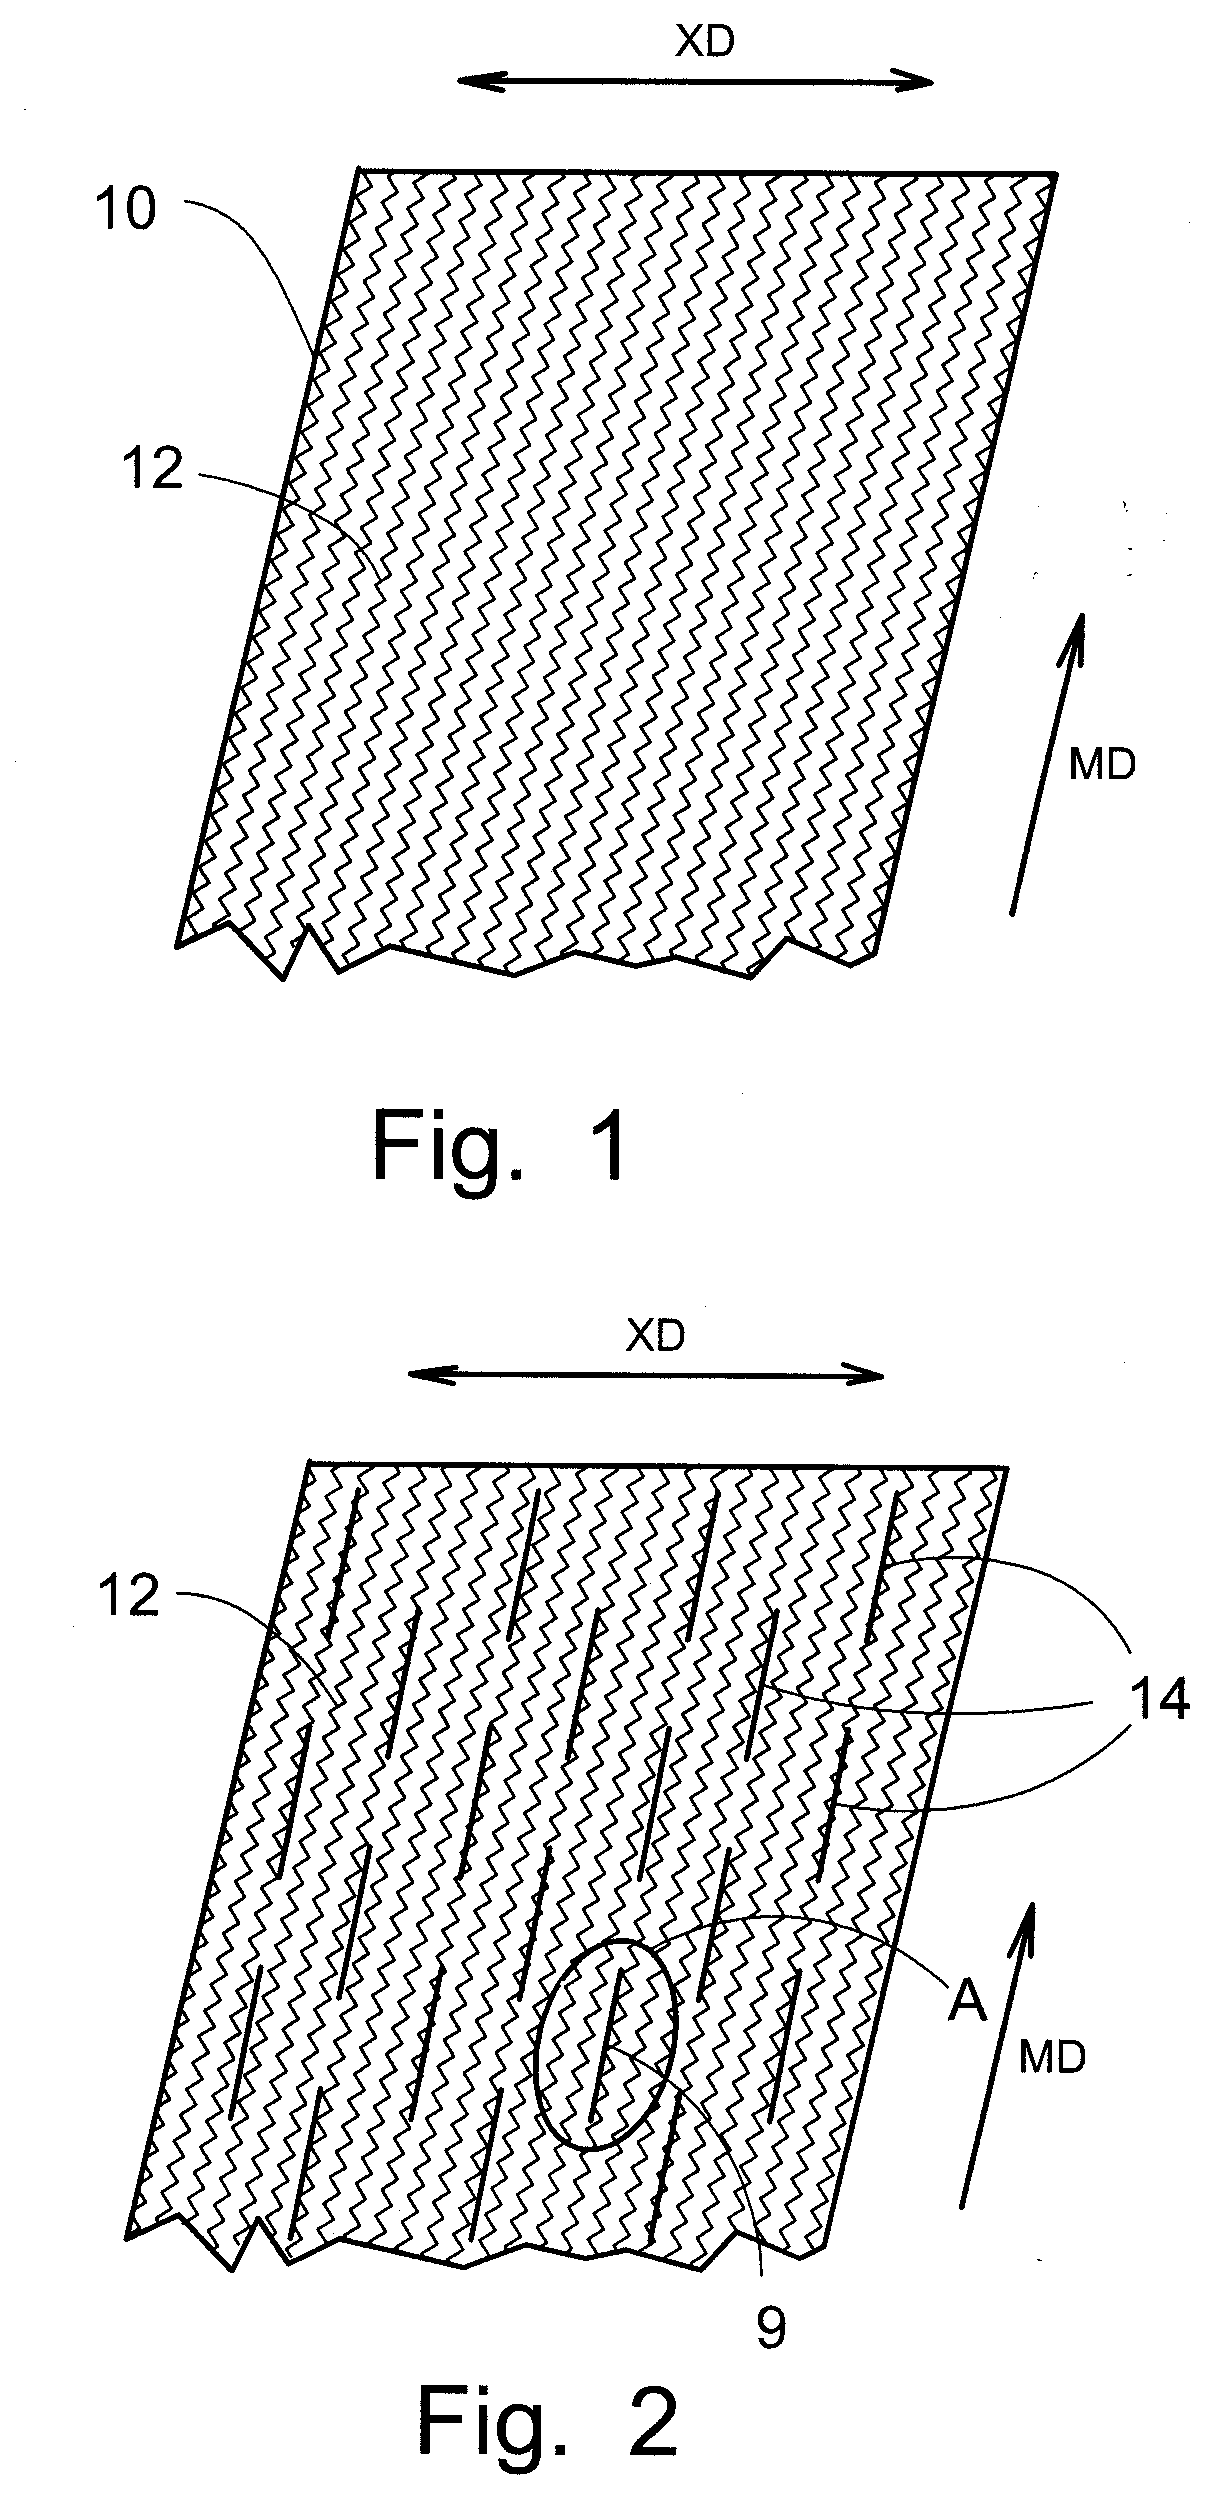 Stitchbonded Fabric With a Slit Substrate